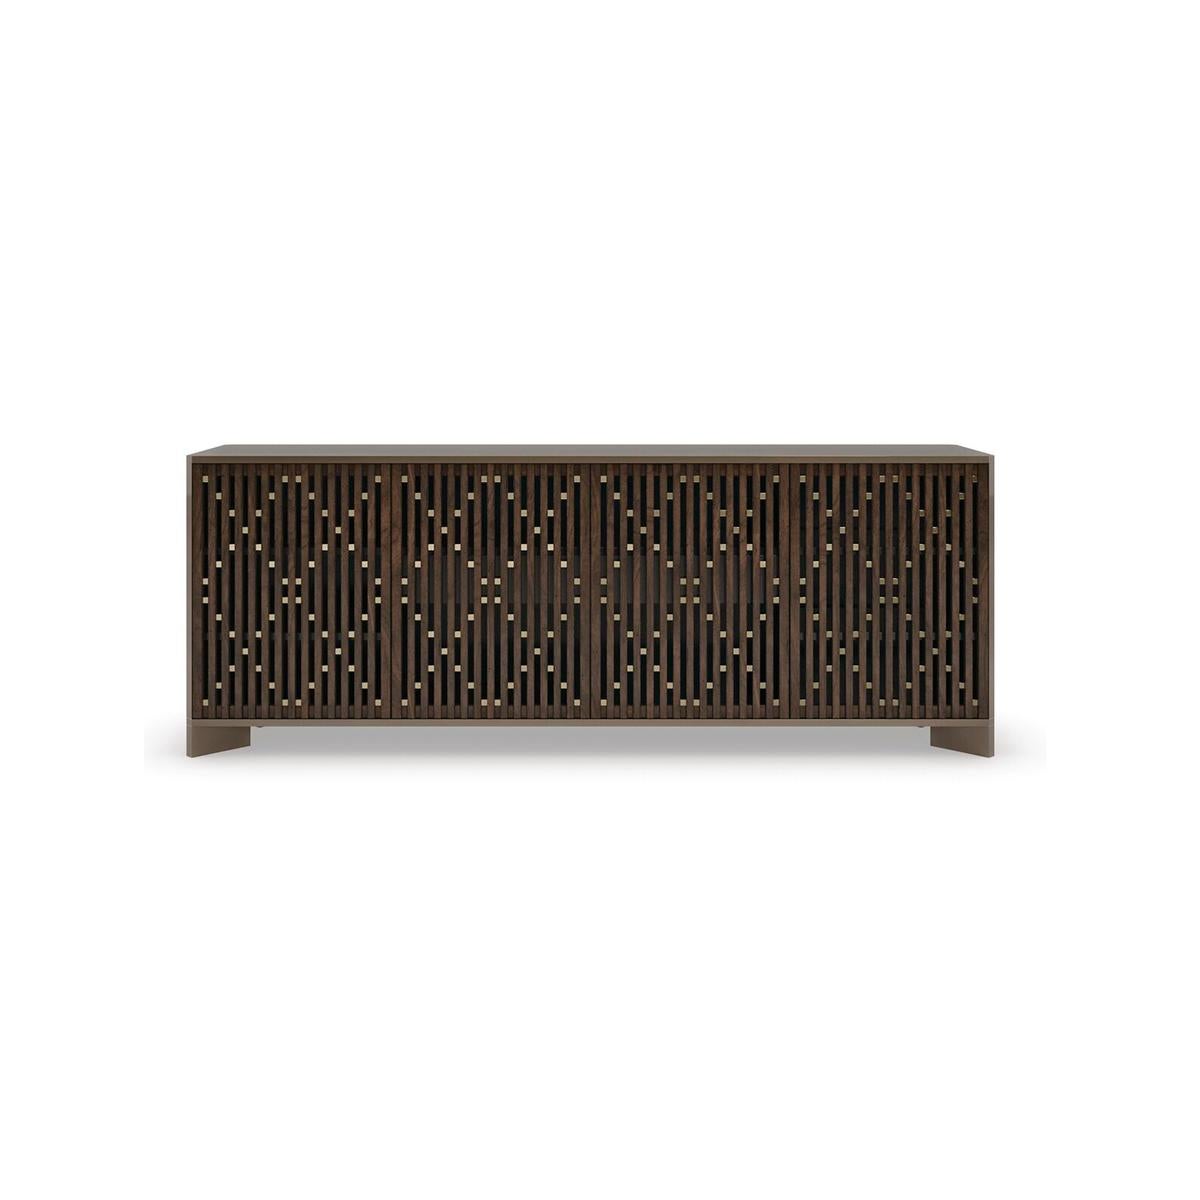 Encased in Brushed Antique Brass paint, linear door fronts feature a slatted wood construction, separated by cube-shaped gold metal spacers to create an argyle diamond pattern.

Features open storage behind center doors, with two drawers and